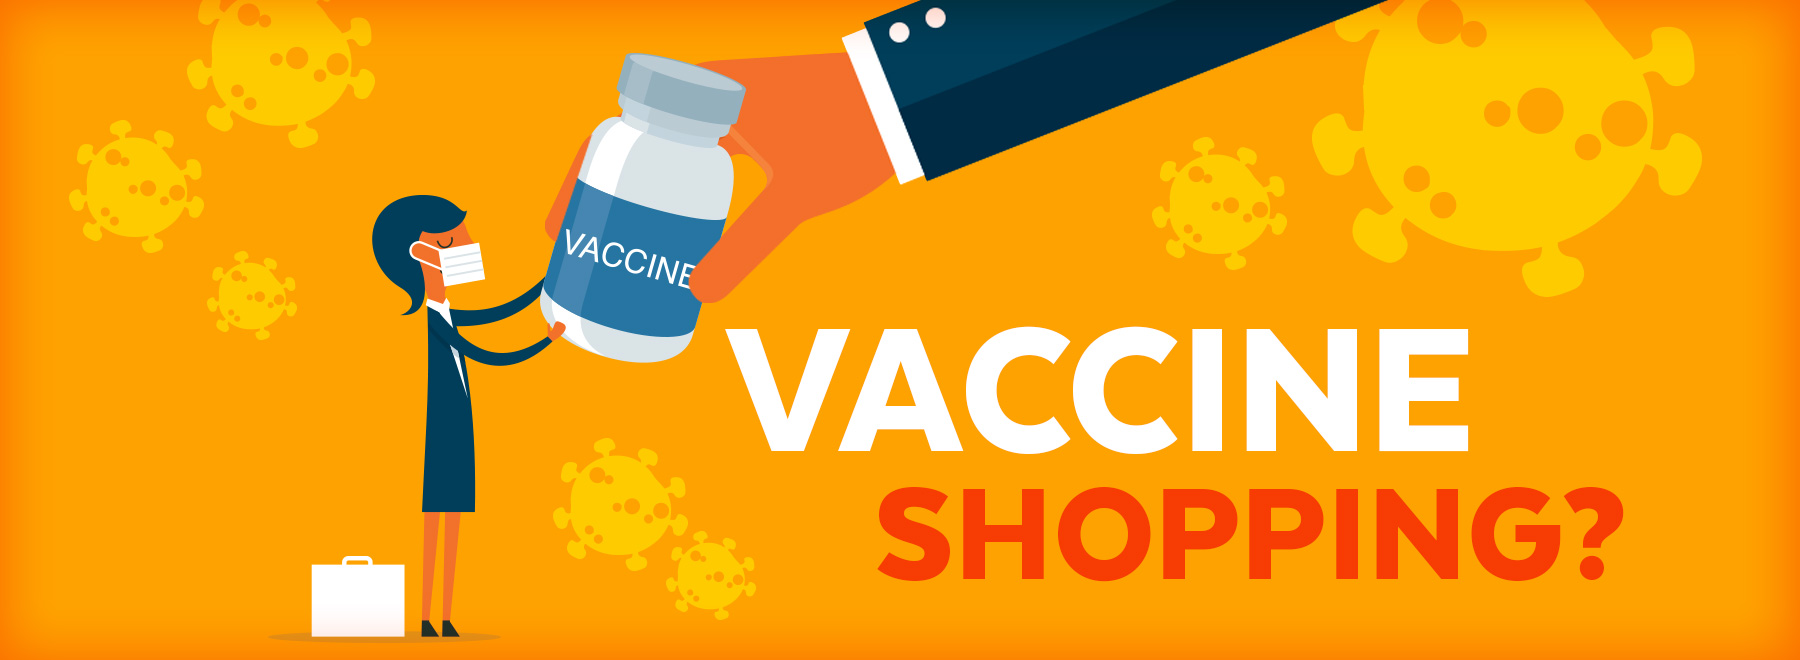 Illustration of a person holding a vaccine vial with text treatment